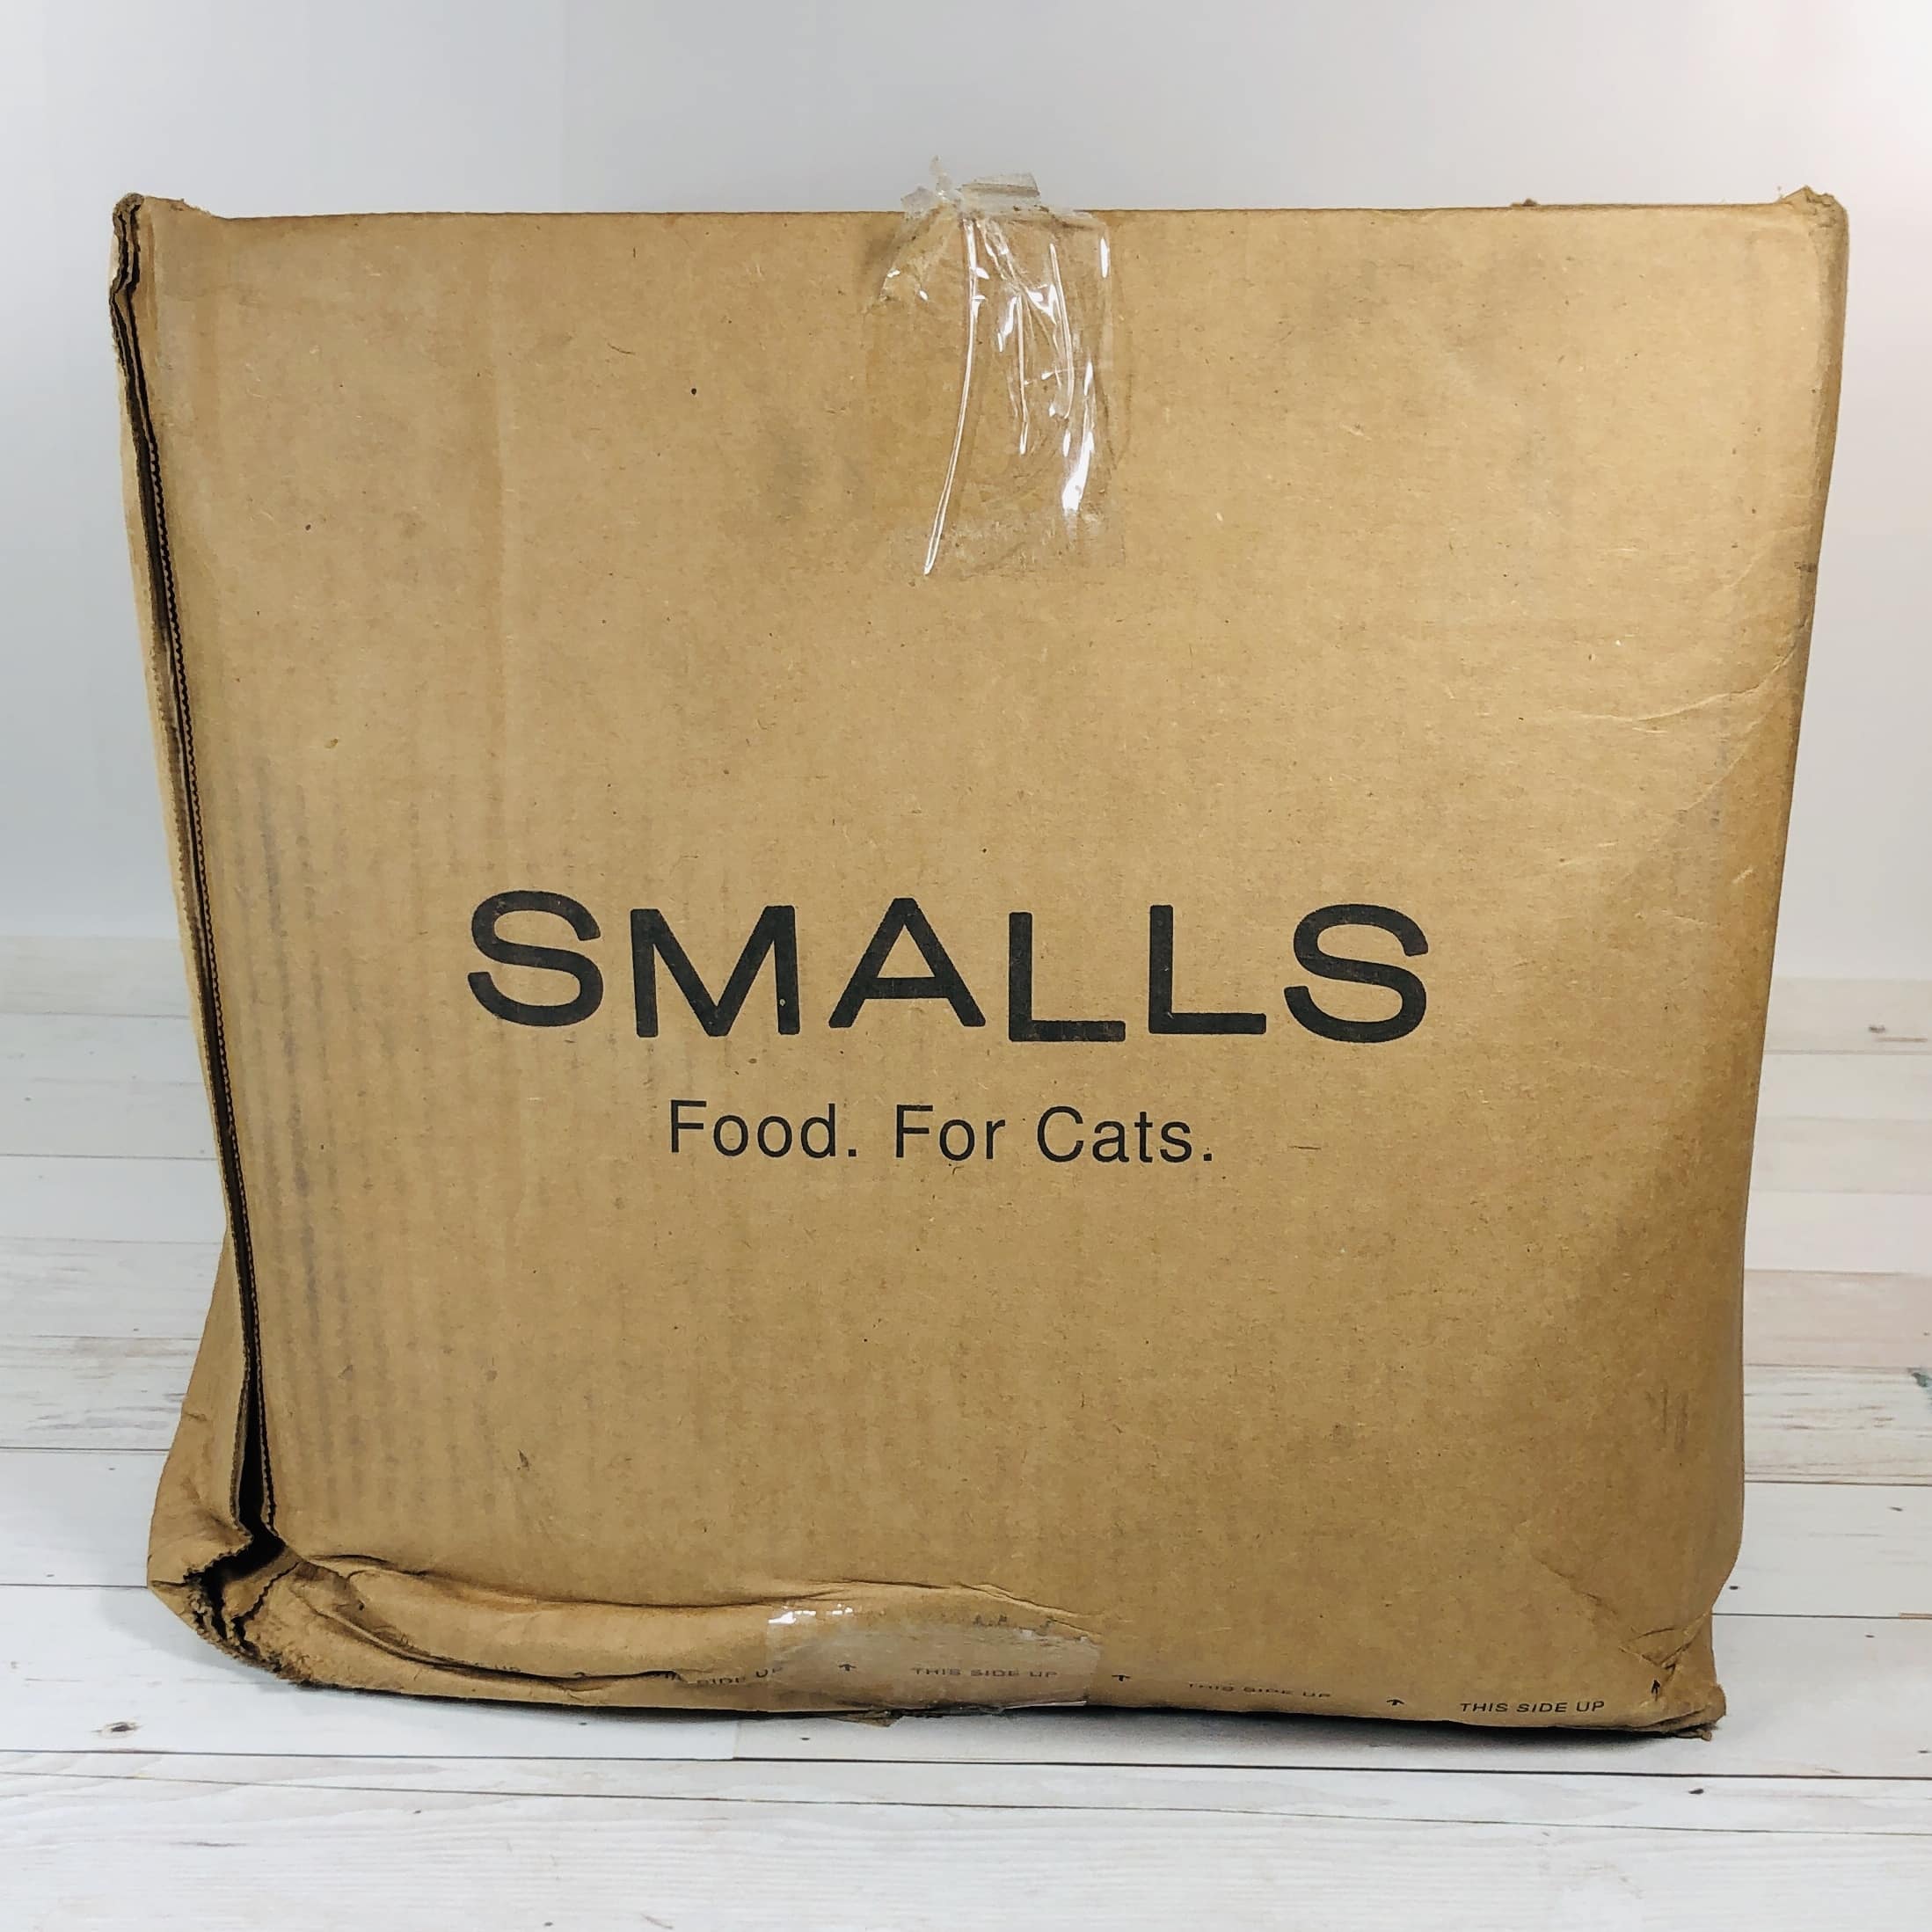 Smalls Digz Cat Litter Subscription Box Review + Coupon! hello